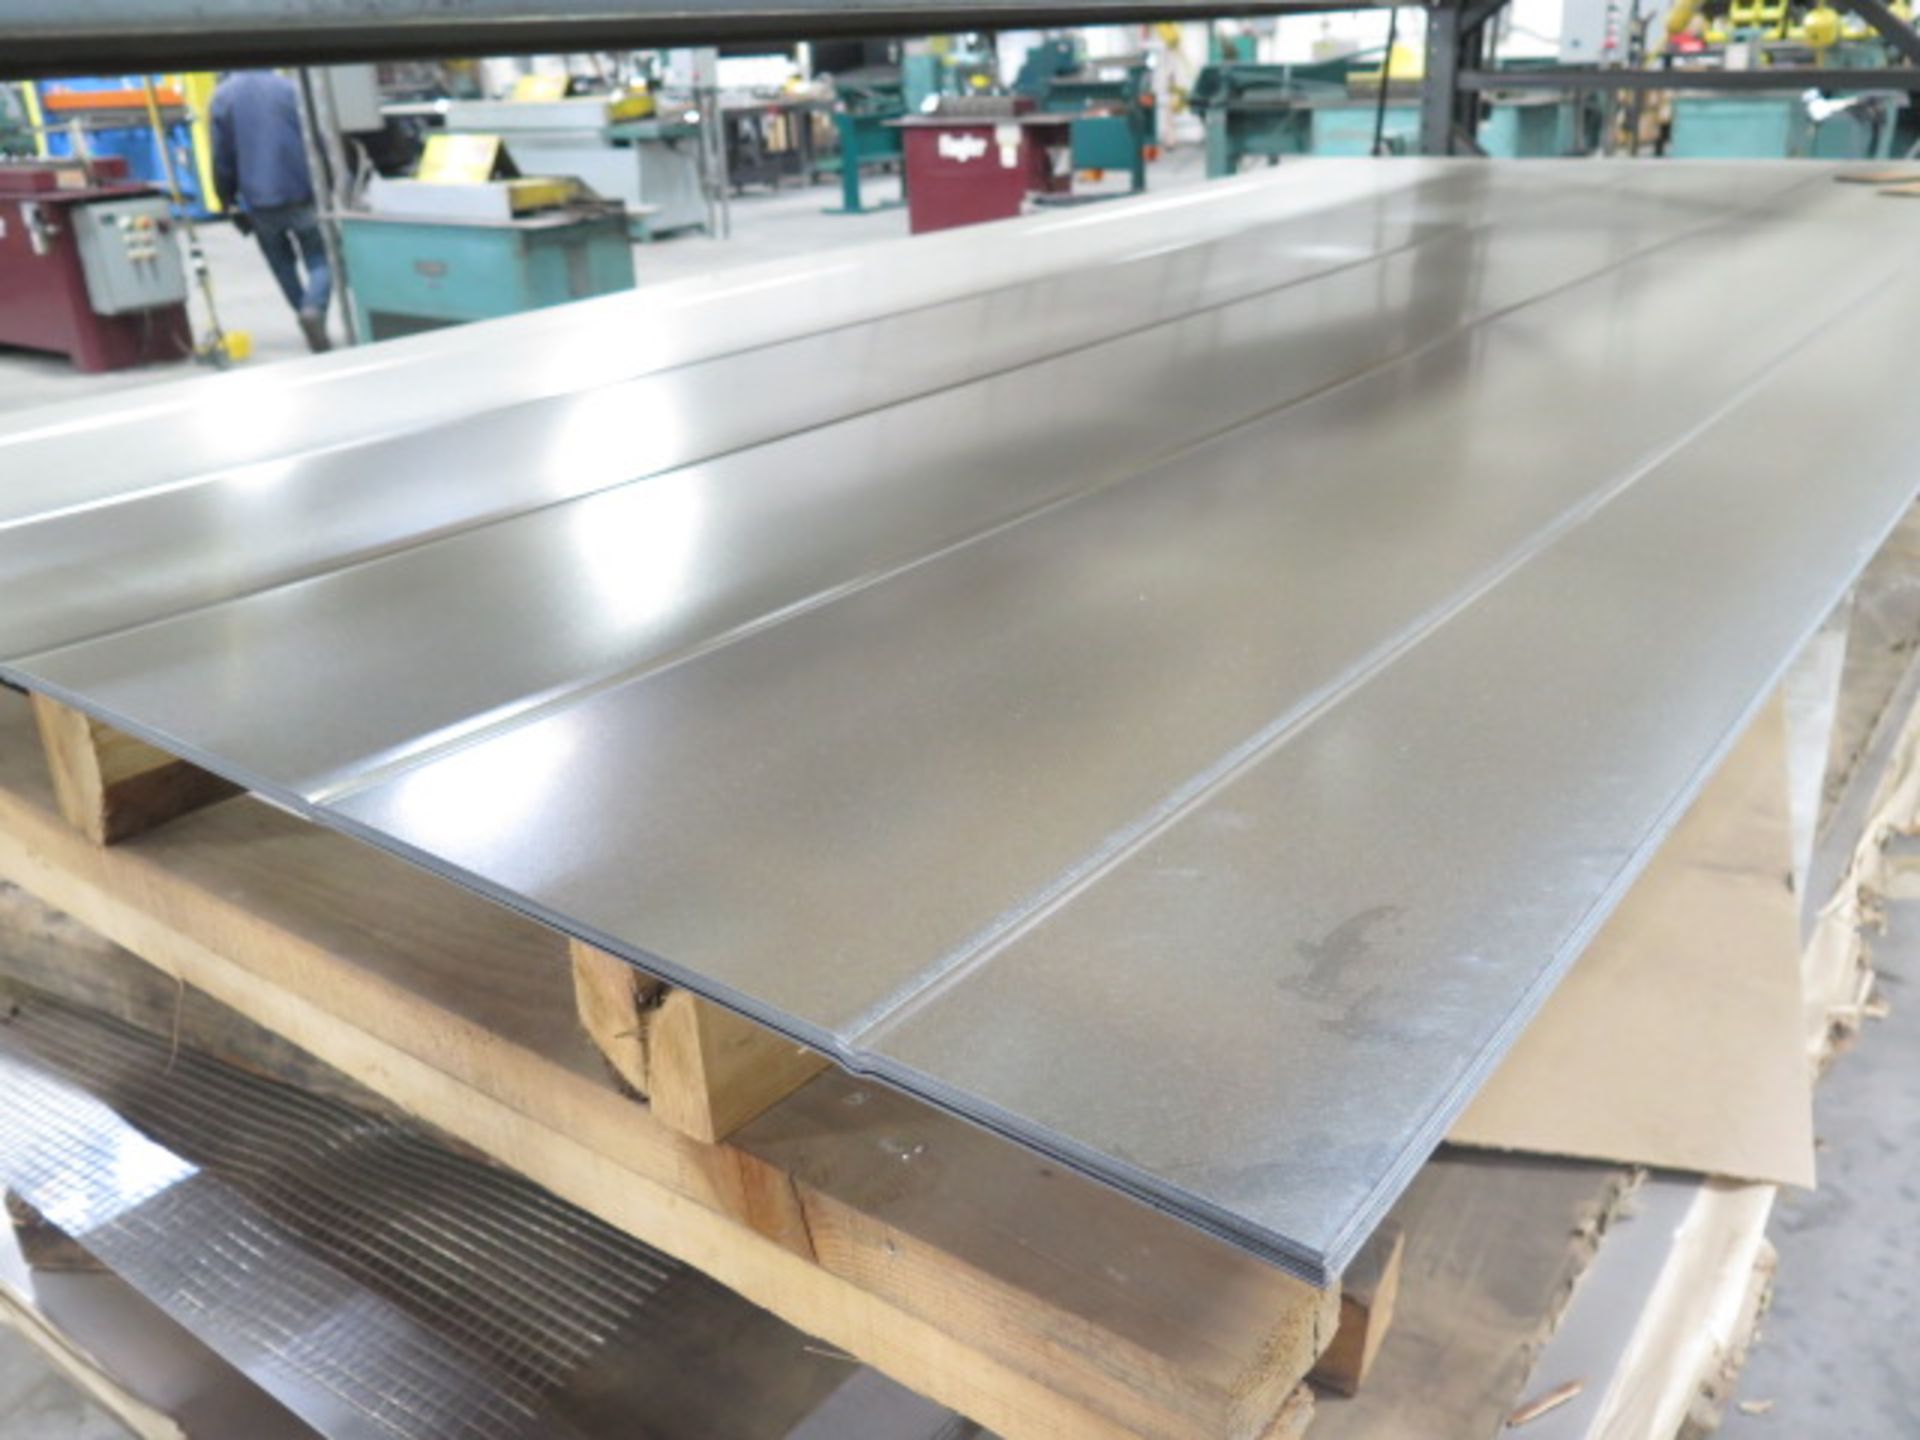 Large Quantity of Beaded Galvanized Sheet Stock anmd Steel Sheet Stock (SOLD AS-IS - NO WARRANTY) - Image 10 of 19